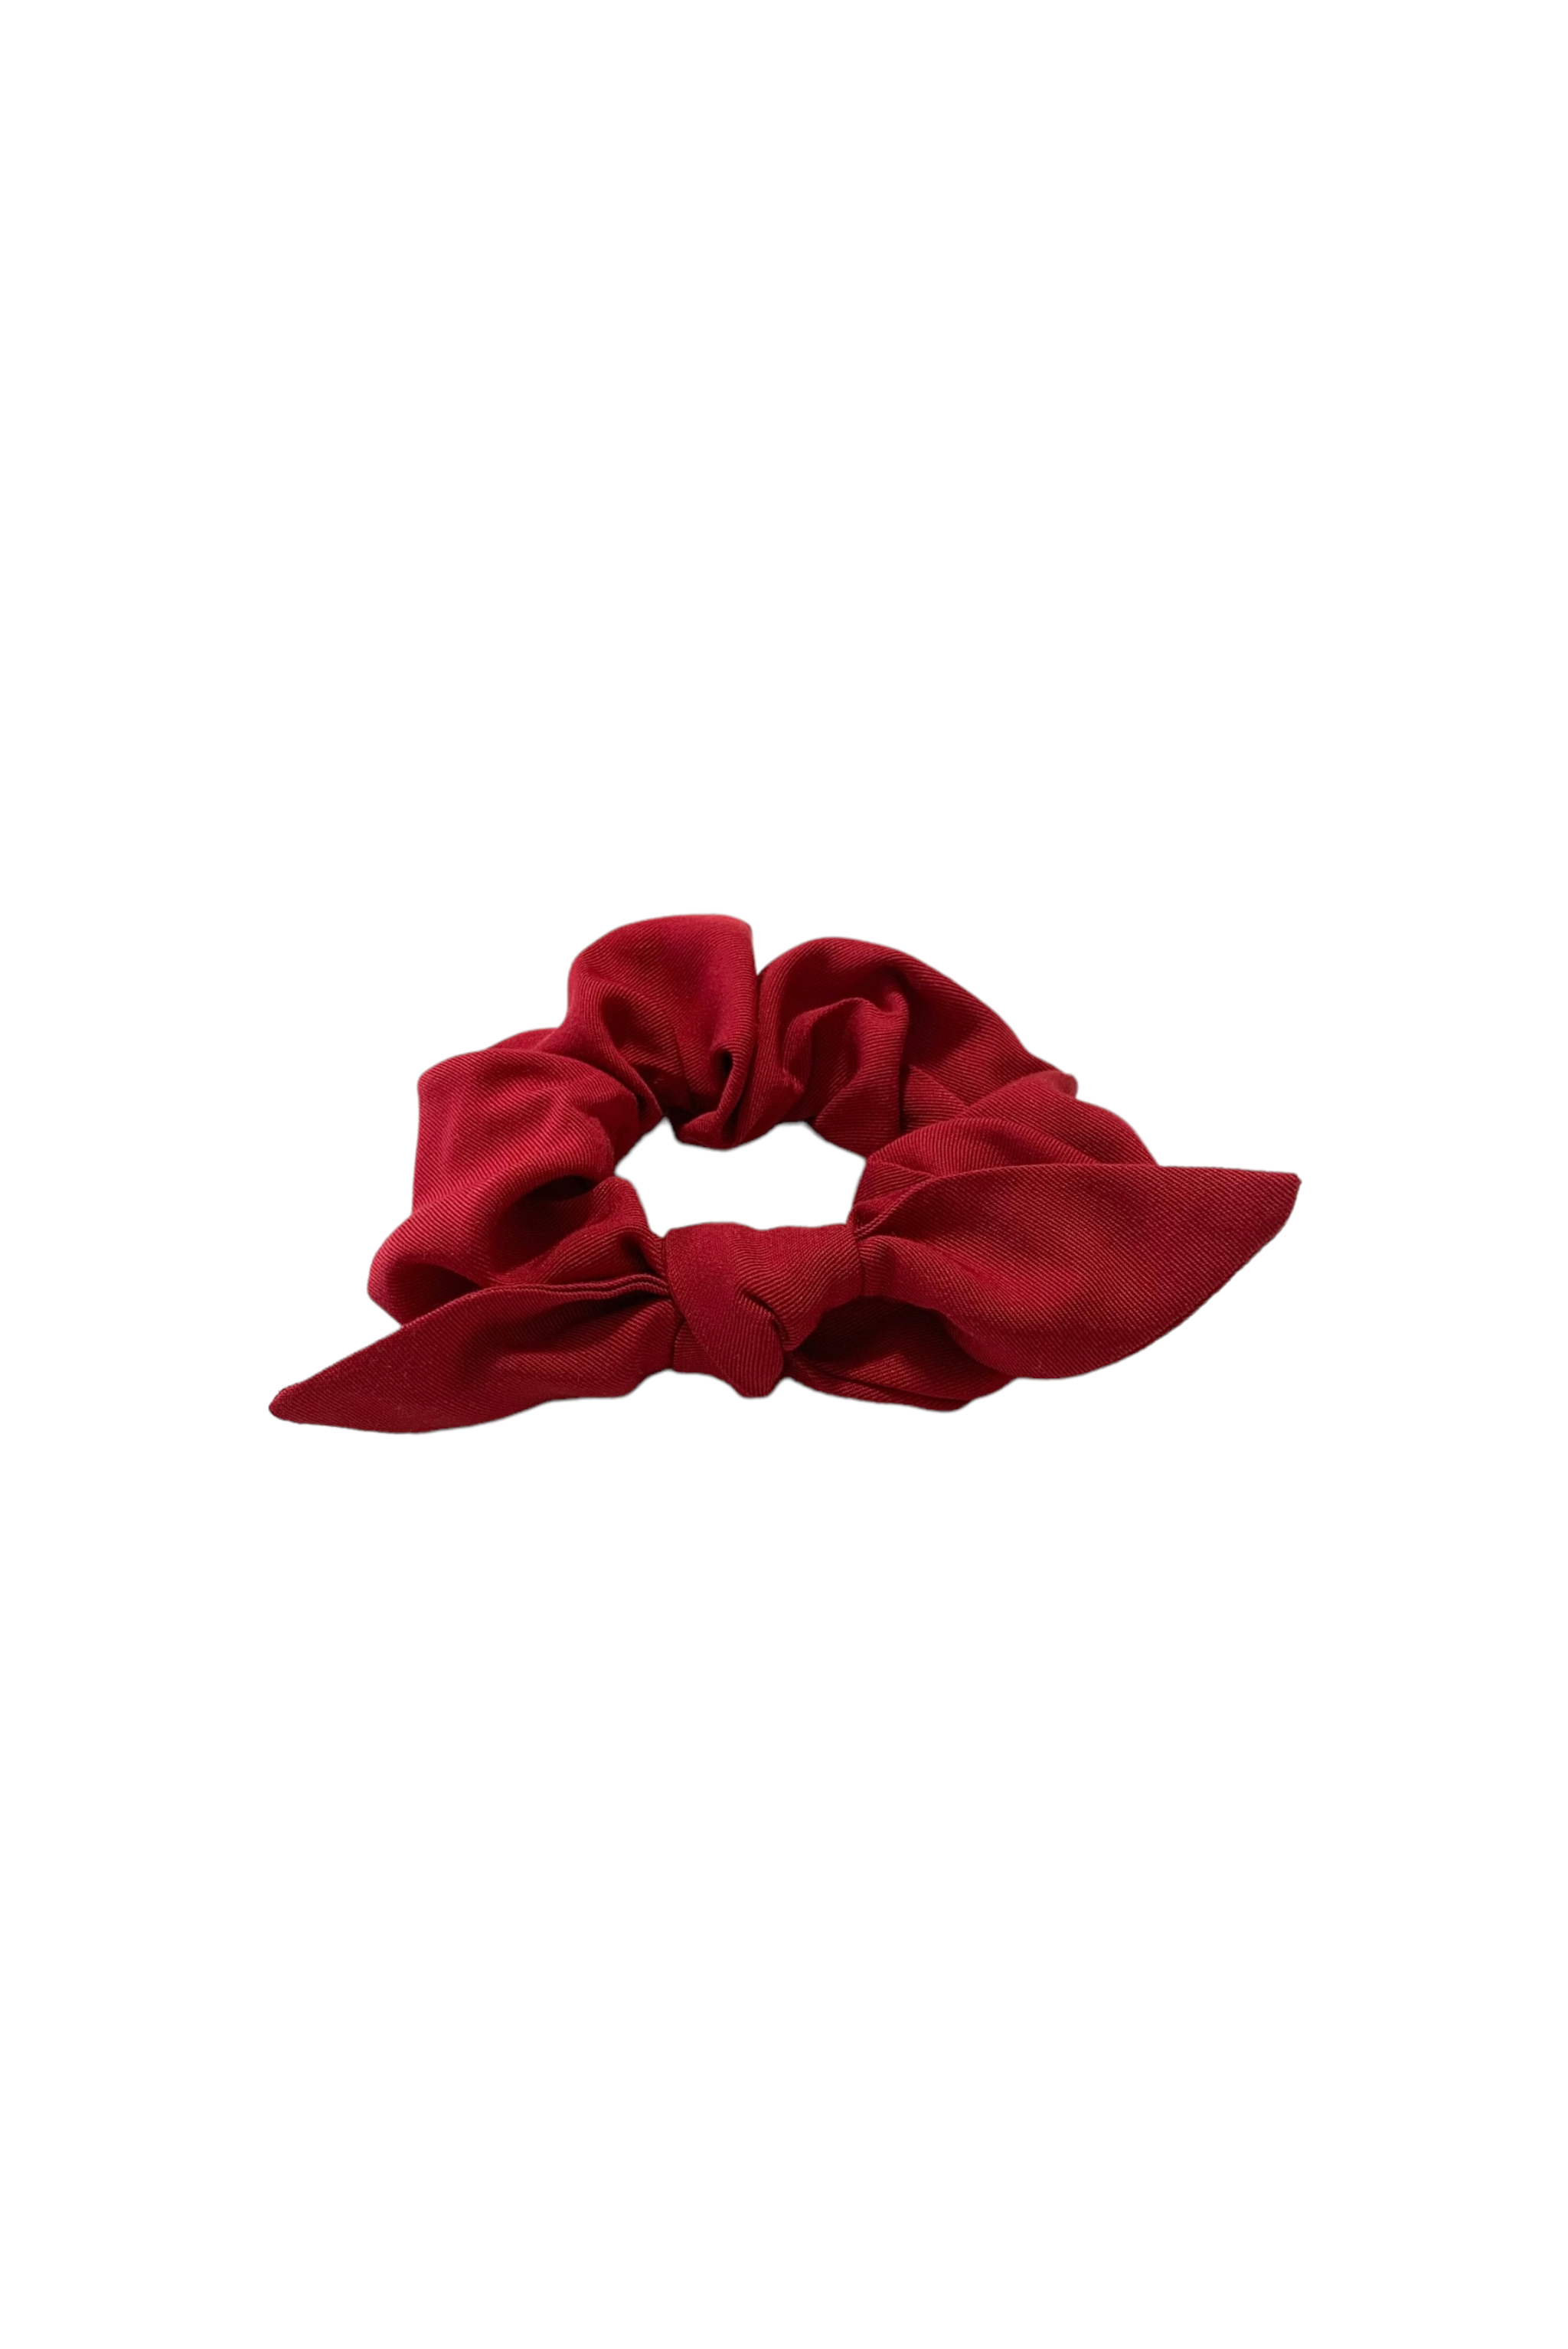 Scrunchie made from recycled fabrics